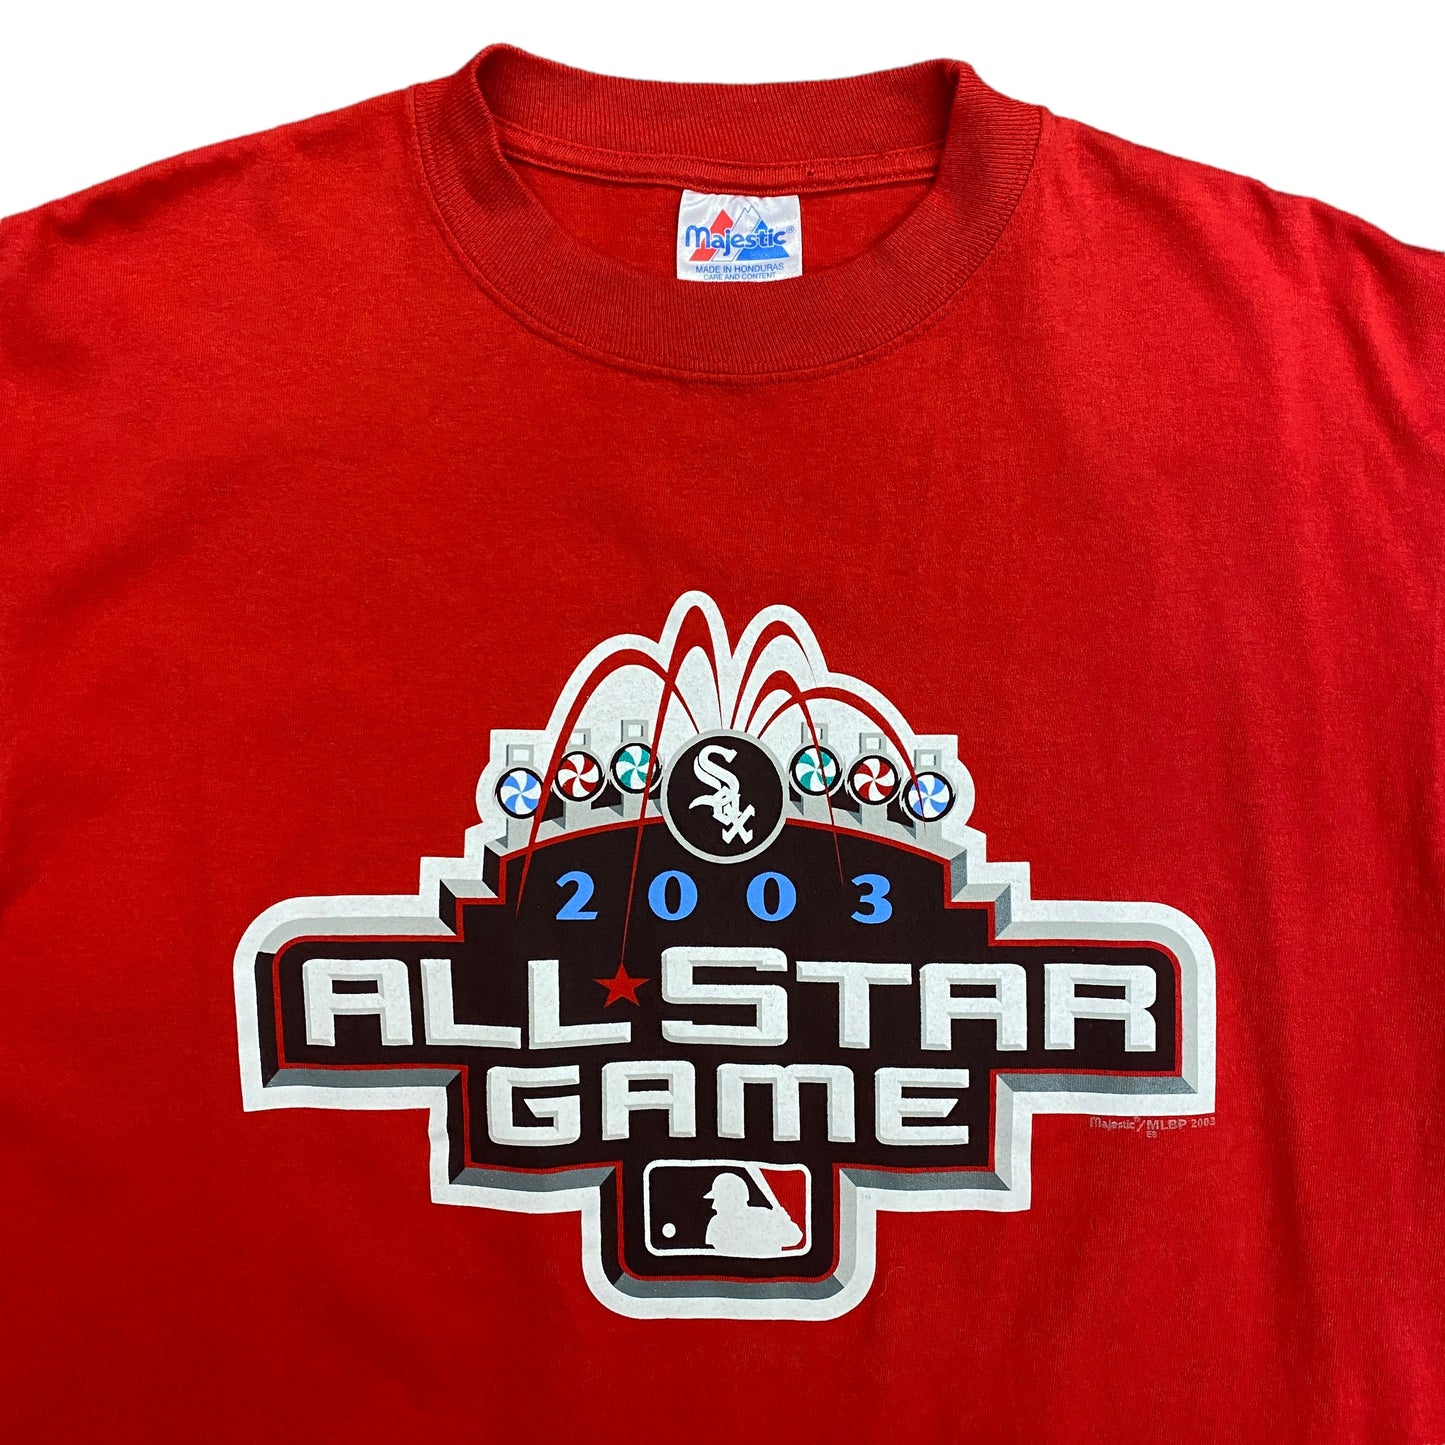 2003 MLB All Star Game Logo Tee - Size Large